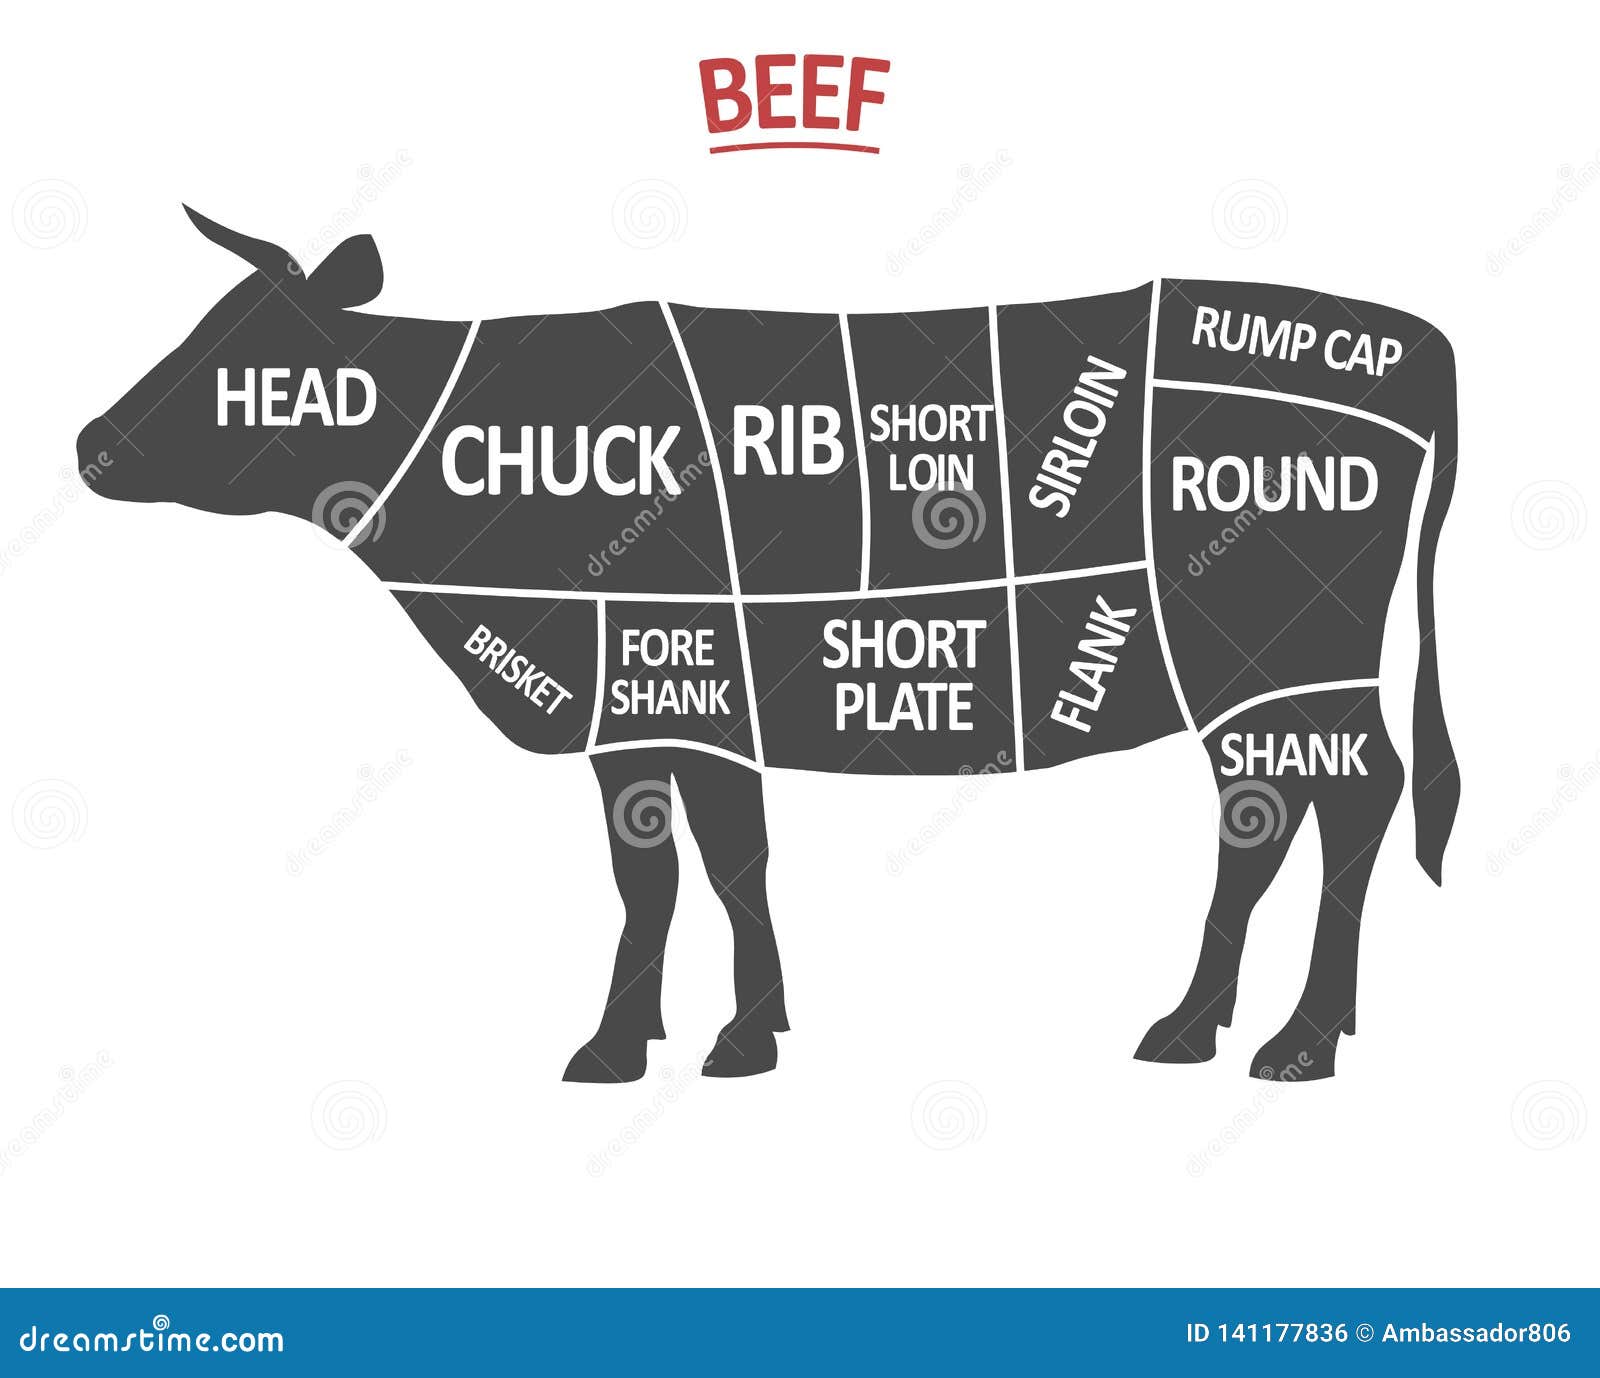 Cuts Of Beef Poster Butcher Diagram Cow Silhouette Isolated Meat Cuts Beef Cutting Scheme Vector Stock Vector Illustration Of Butchery Barbecue